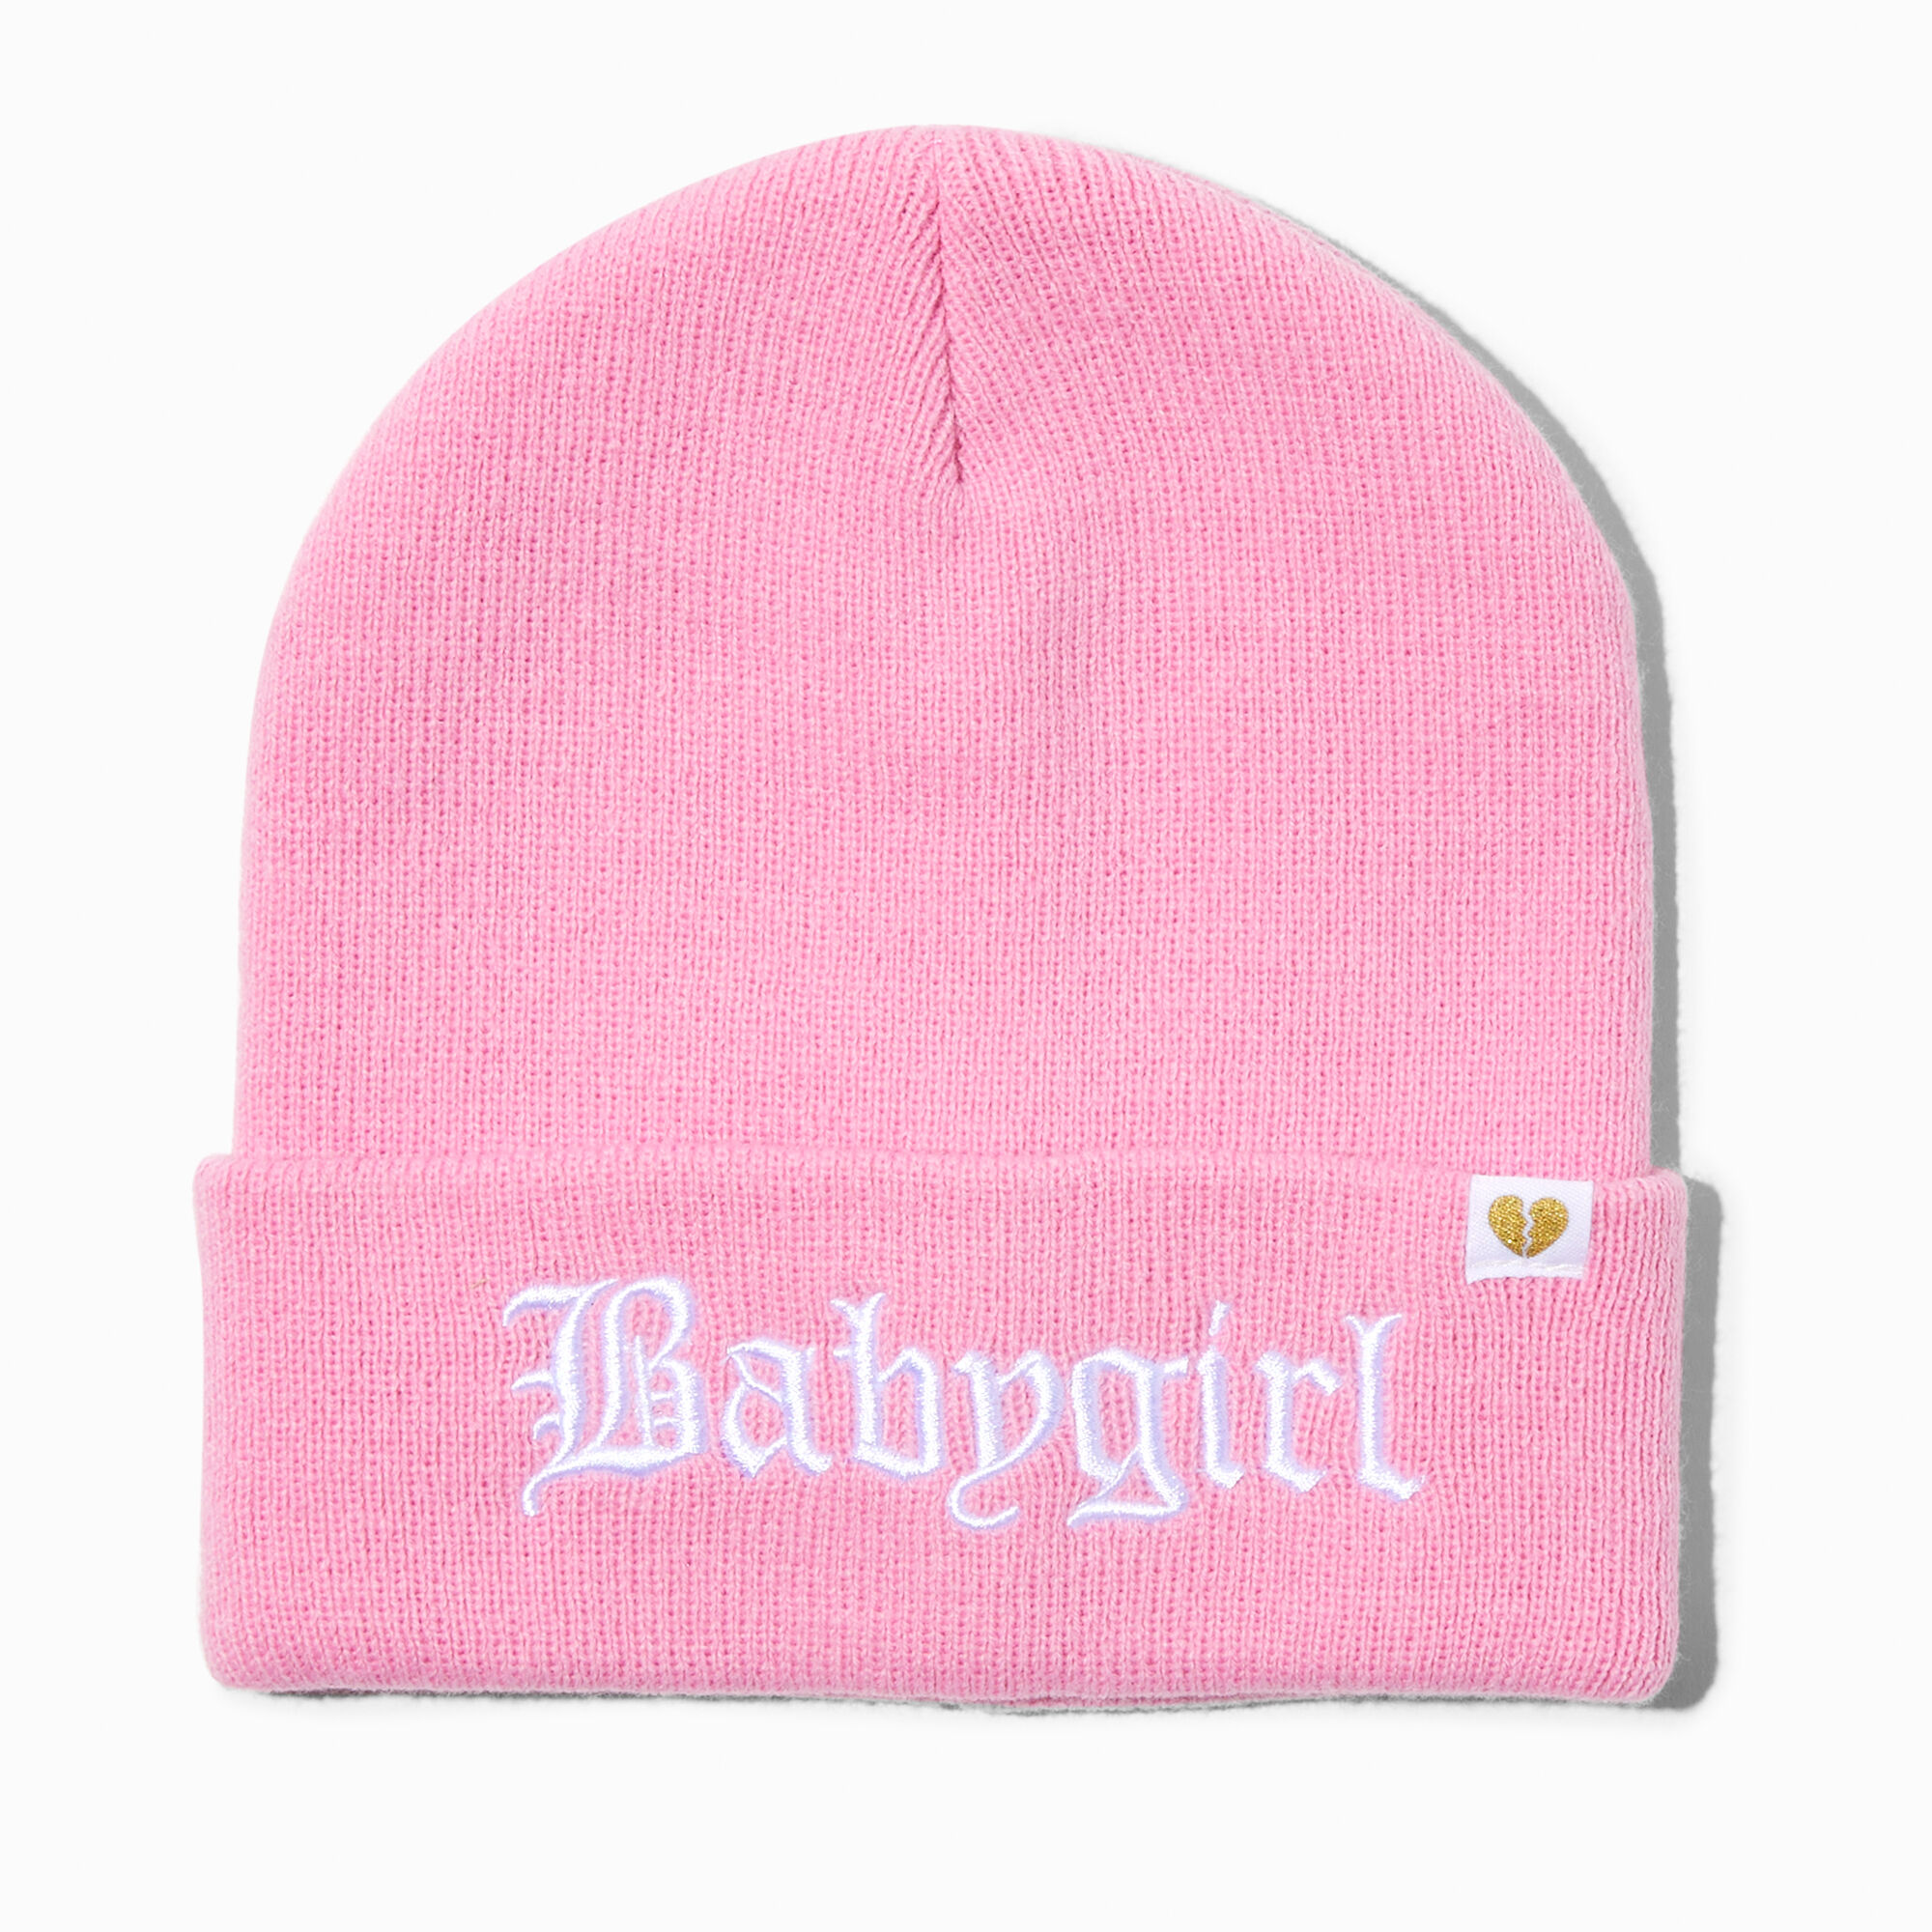 View Claires babygirl Light Beanie Hat Pink information